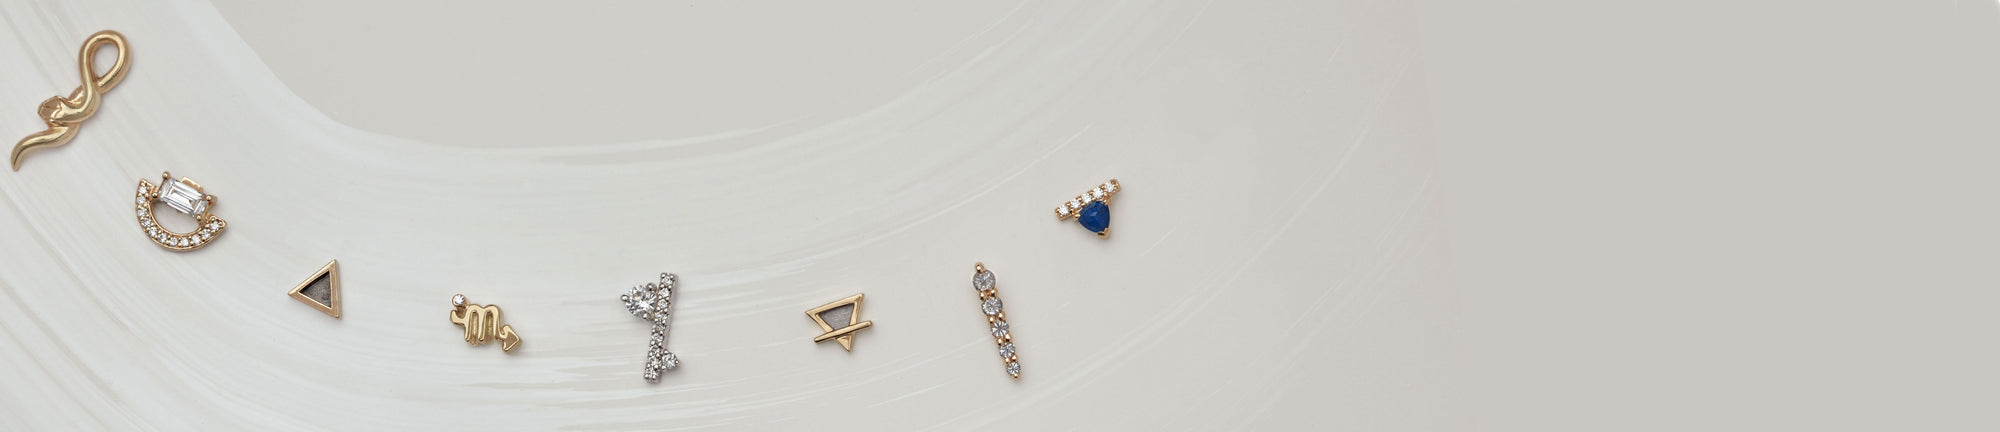 An array of 8 gold stud earrings in different shapes, stones, and colors on light-grey background with a brushstroke design